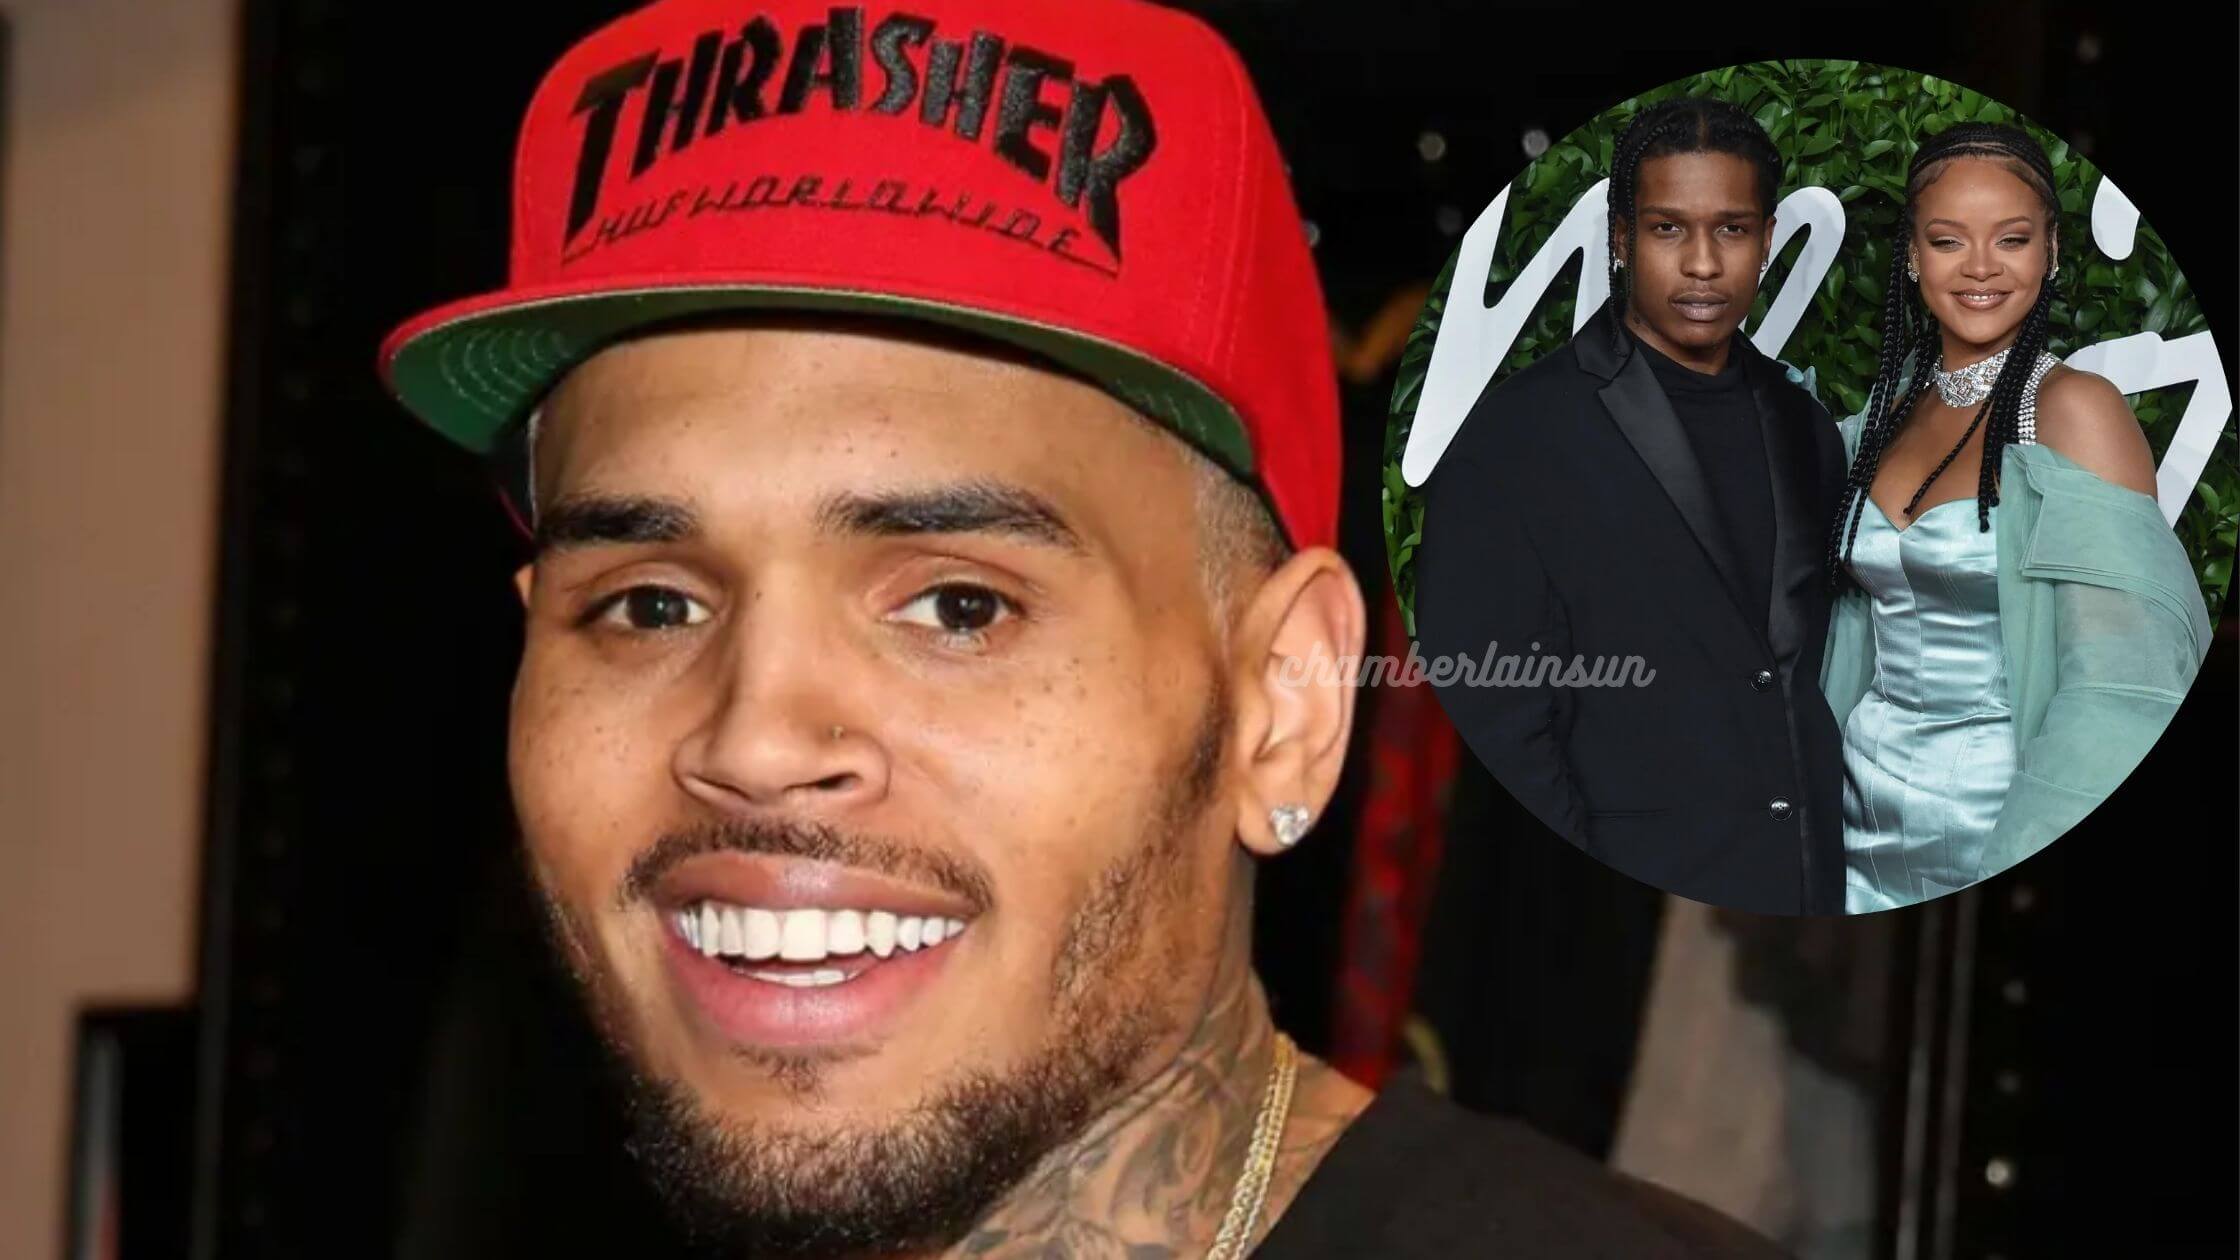 Chris Brown Sends His Best Wishes To Rihanna And A$ap Rocky's Newborn Son